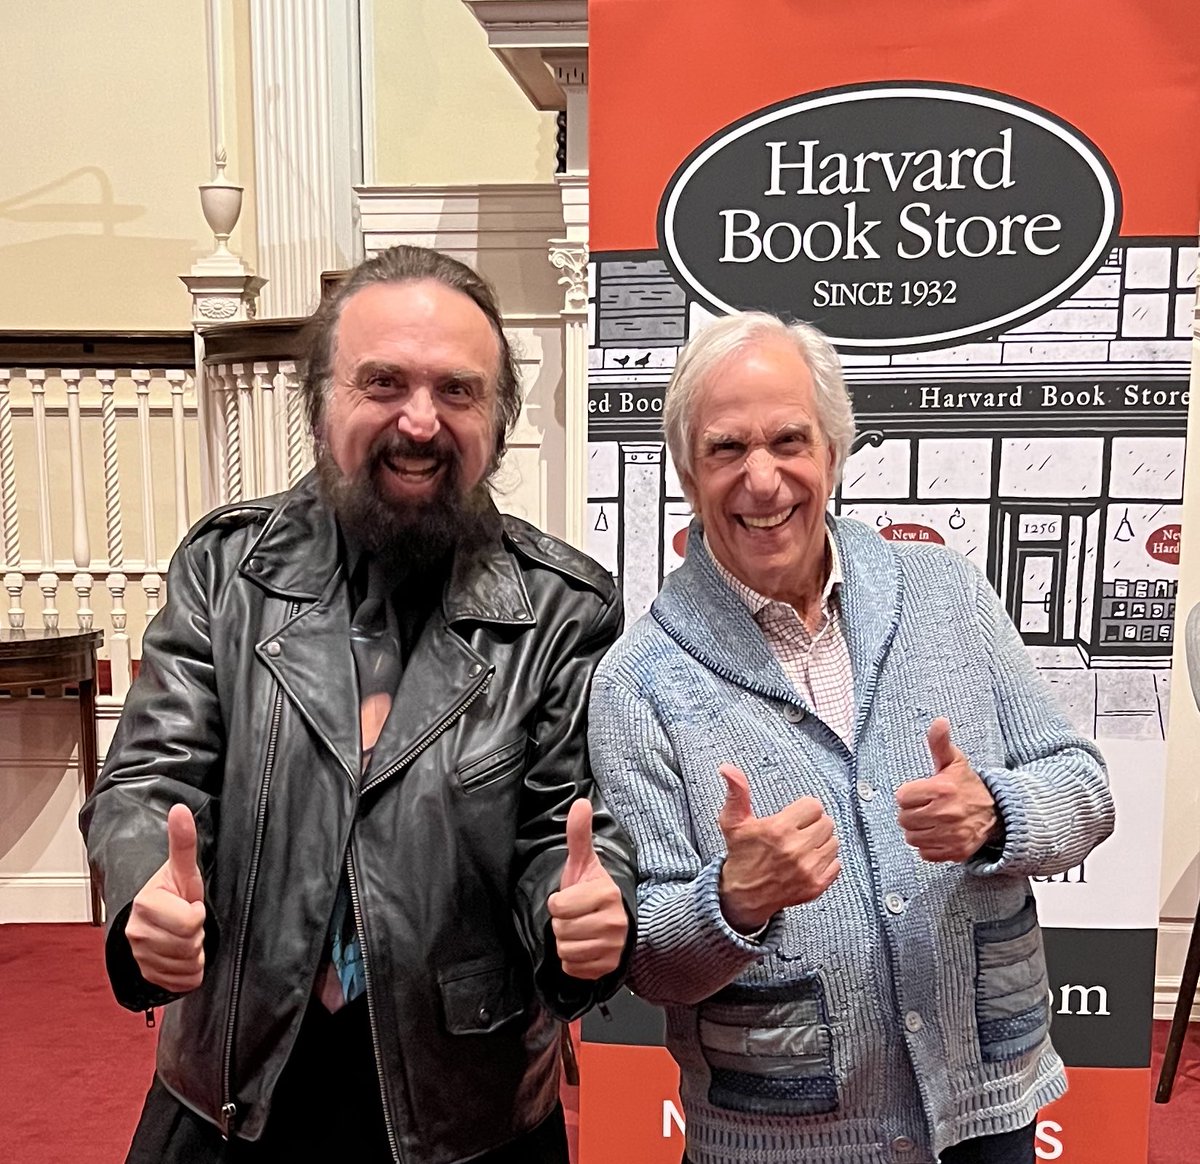 Just a couple of Fonzies being cool. Legendary pop icon #HenryWinkler treated his Bay State fans to a memorable night at #HarvardBookStore sponsored book party for #TheFonz’ new book #BeingHenry. @hwinkler4real @HarvardBooks